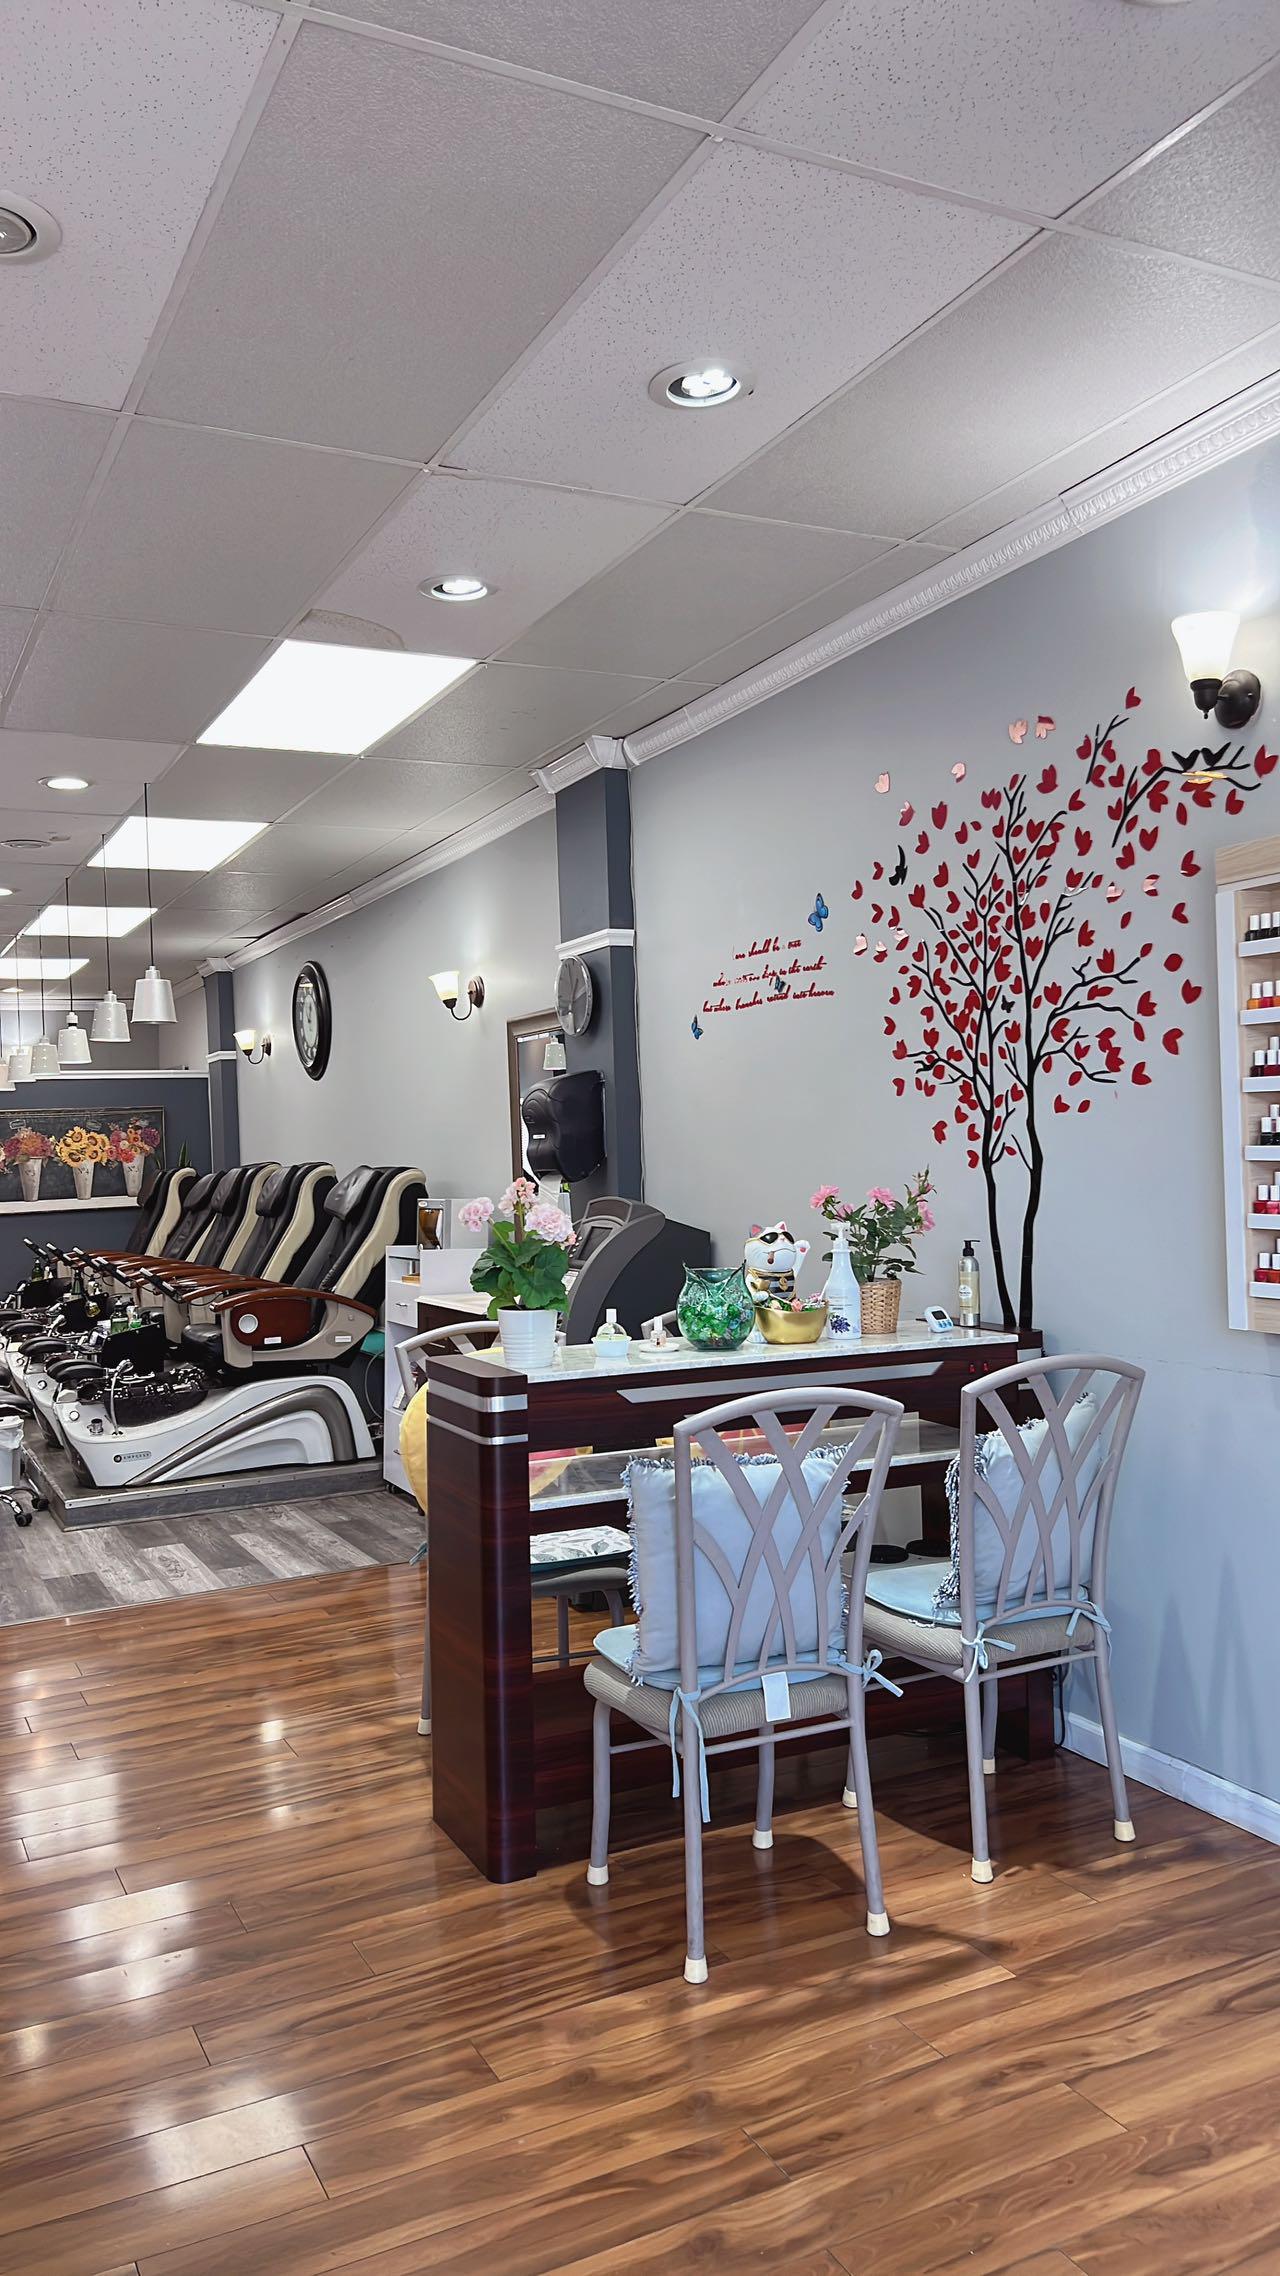 Leewood Nails, 3001 State Route 35, Hazlet, NJ - MapQuest